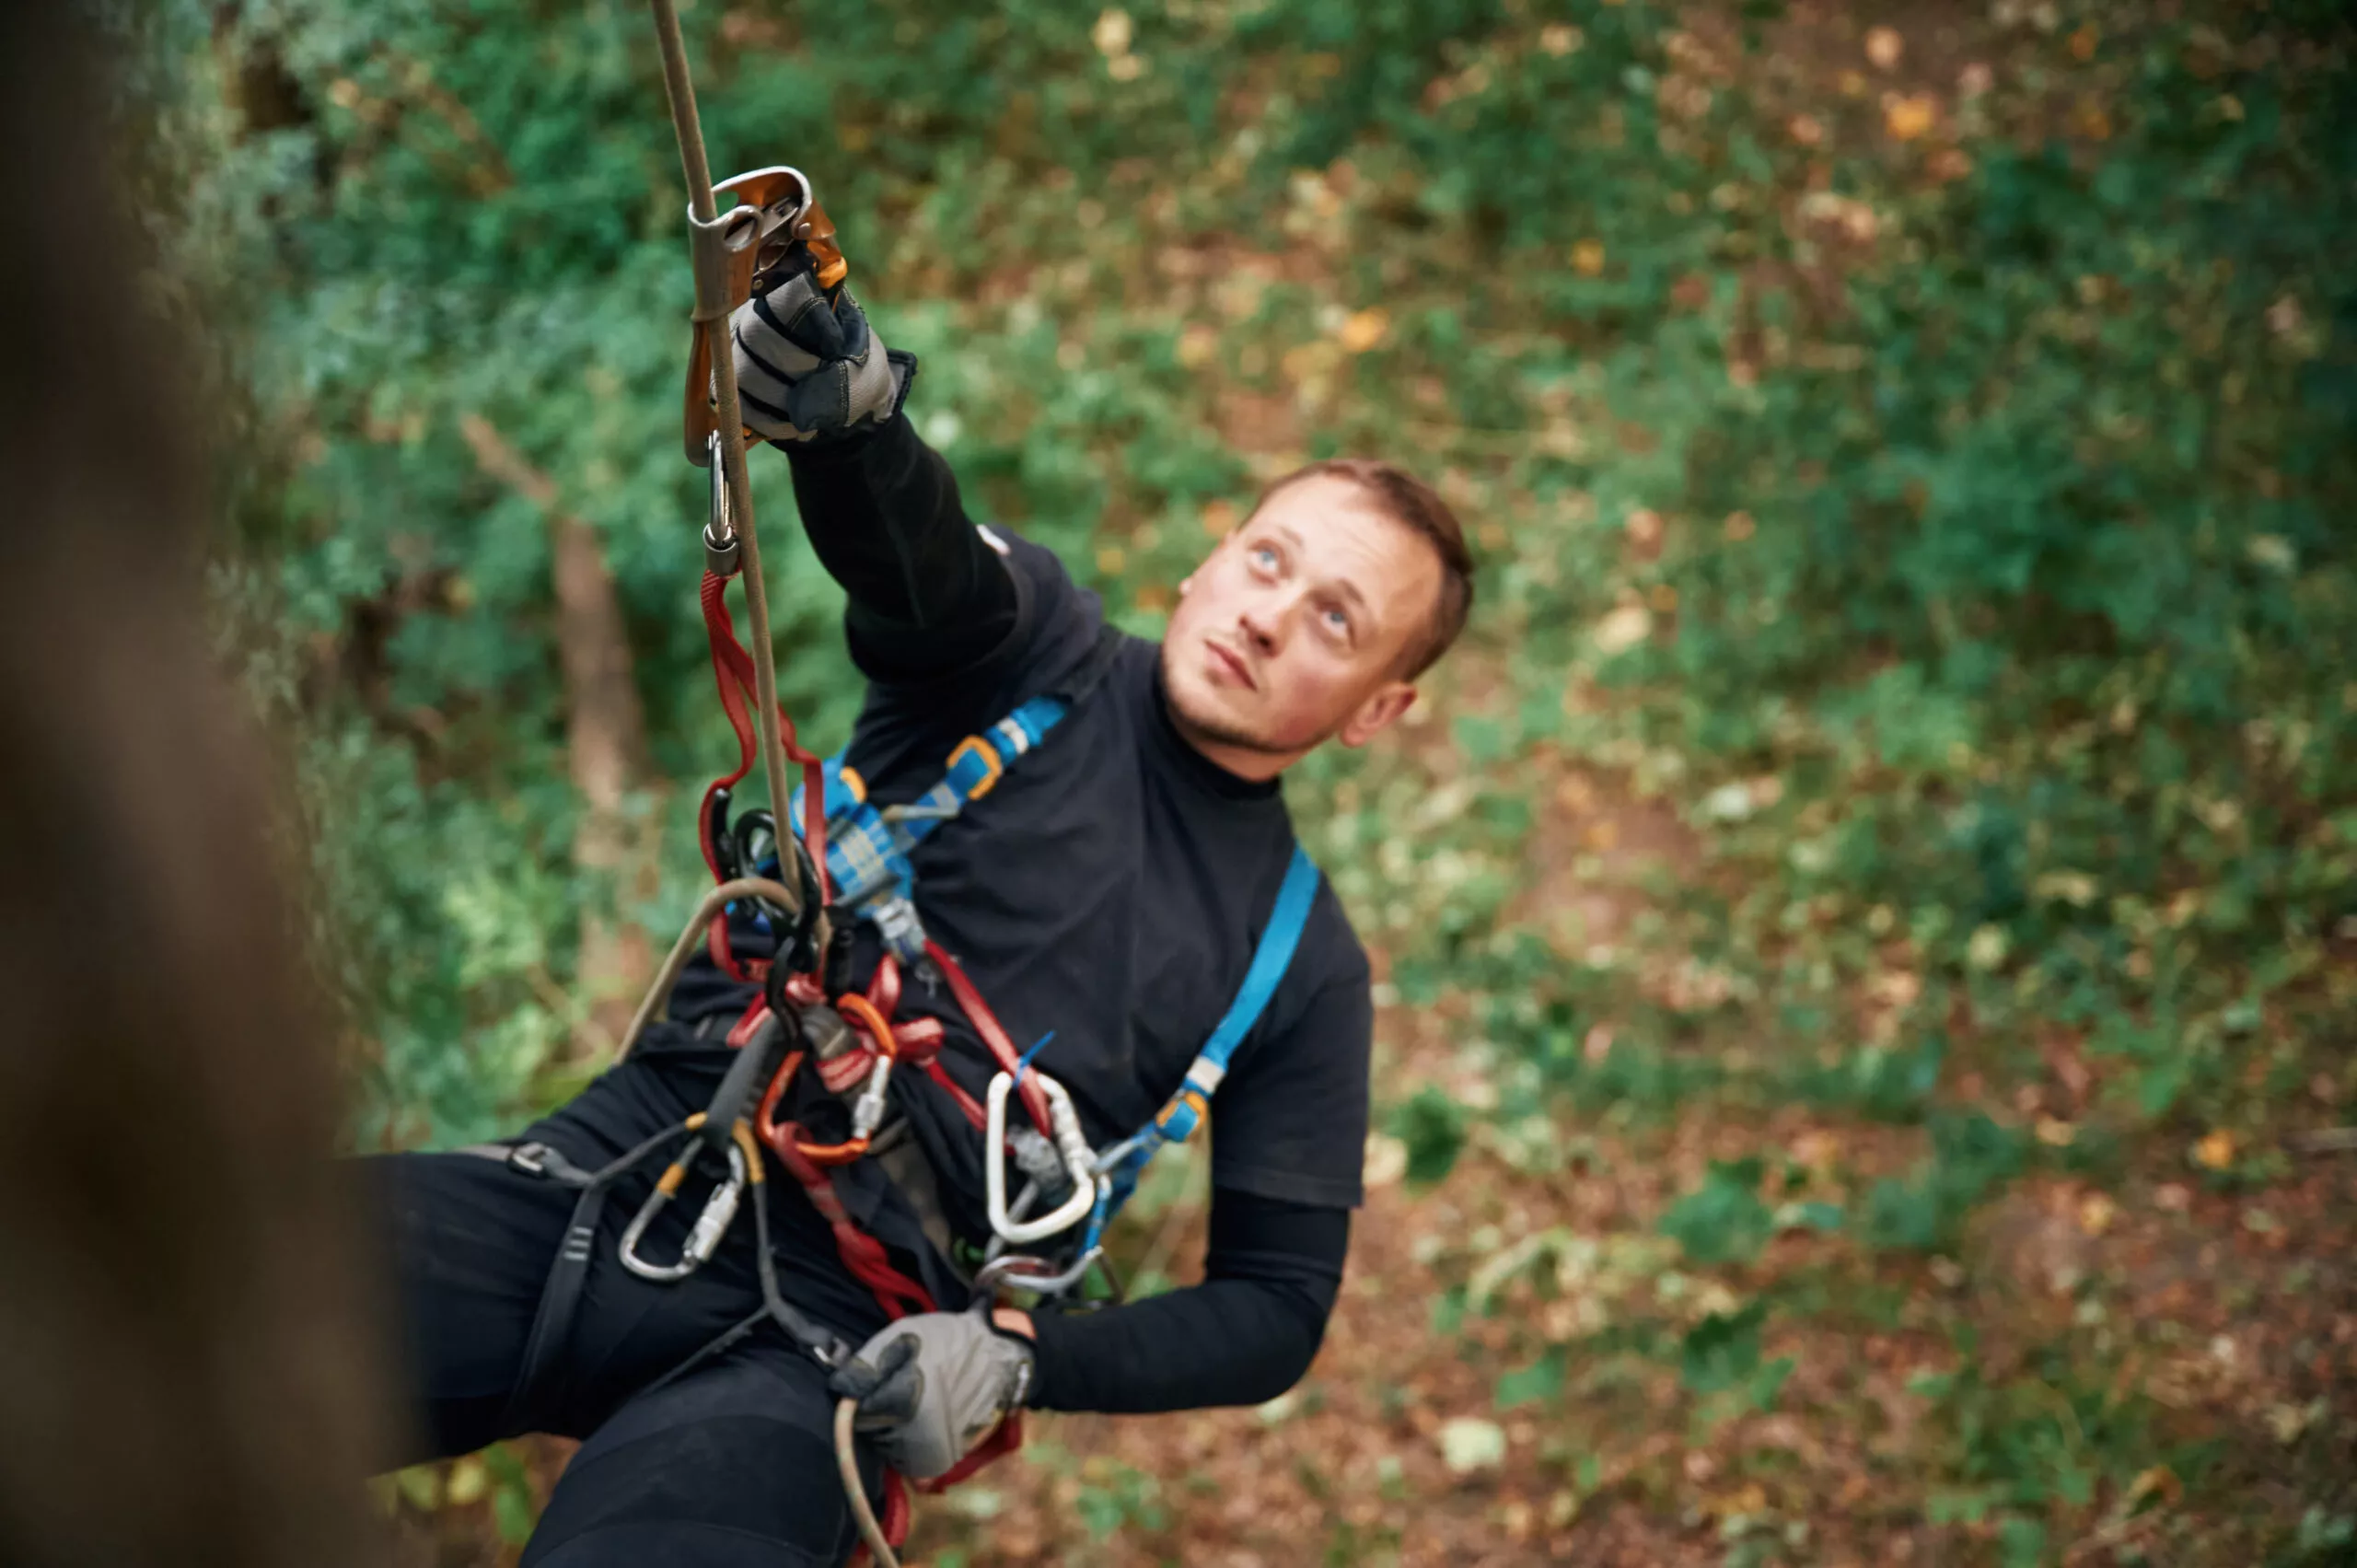 On the high tree, hanging. Man is doing climbing in the forest by use of safety equipment